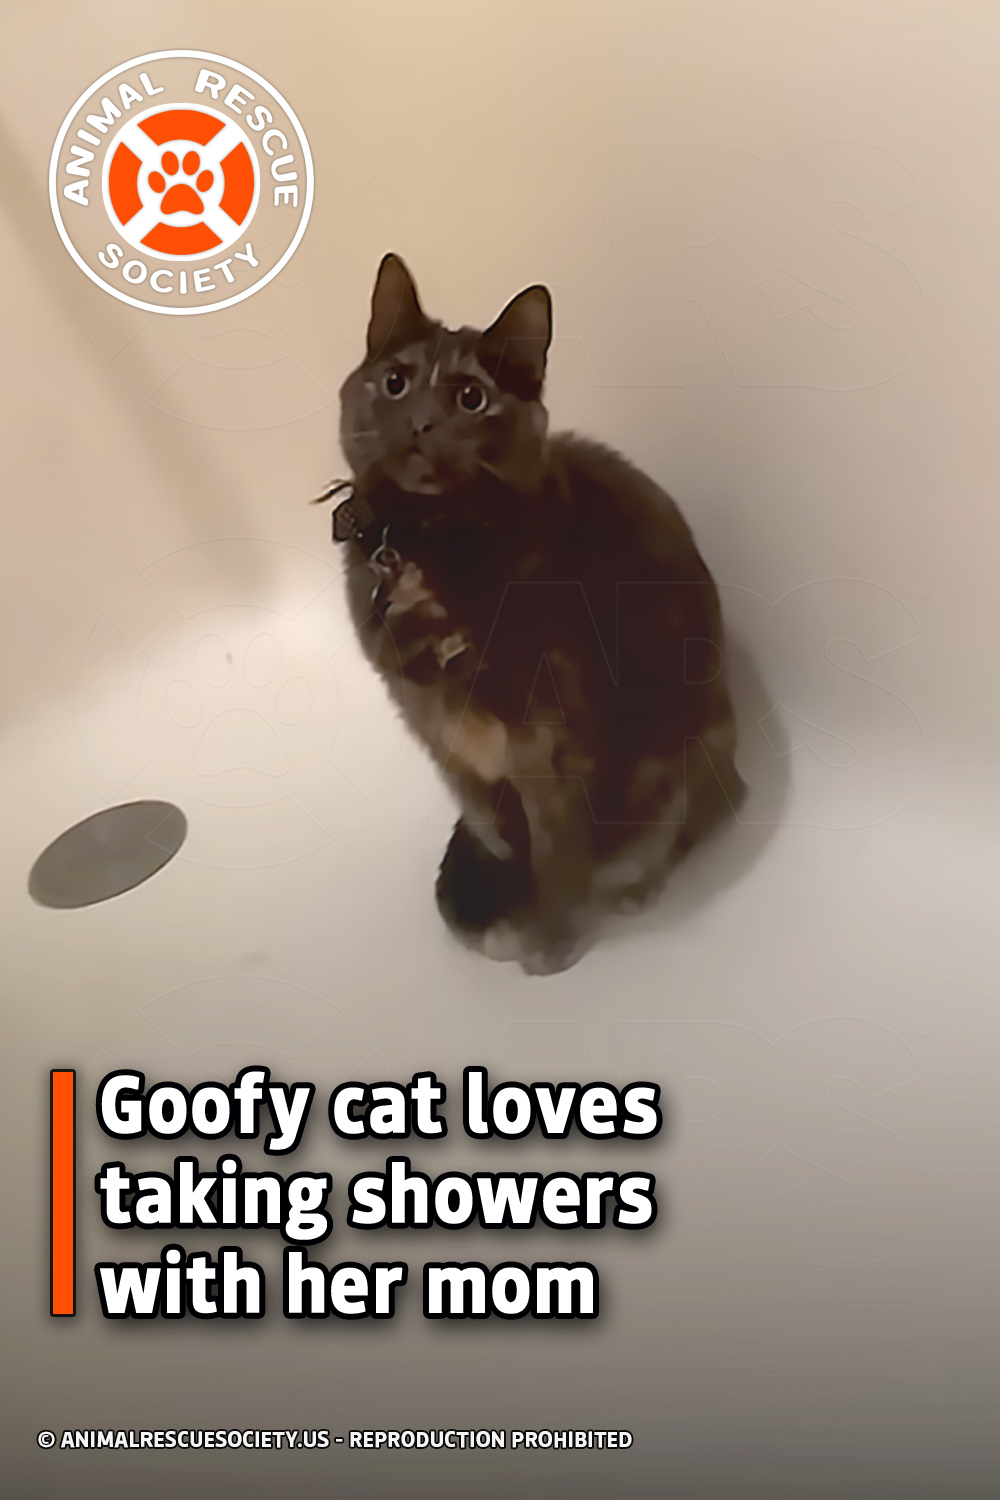 Goofy cat loves taking showers with her mom